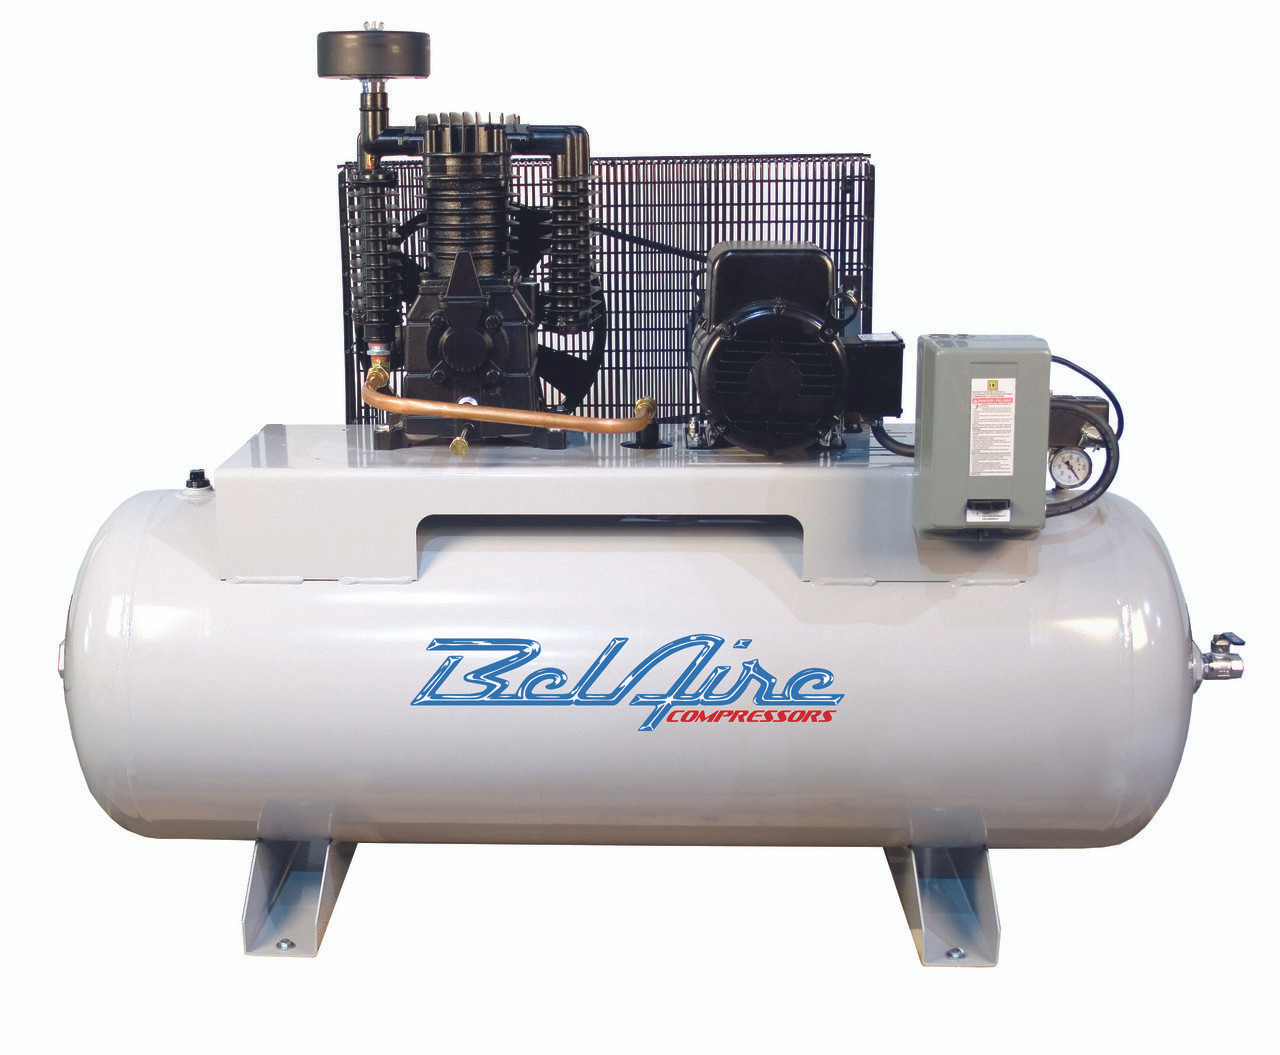 BelAire 338H 5 HP 208-230 Volt Three Phase Two Stage 80 Gallon Air Compressor